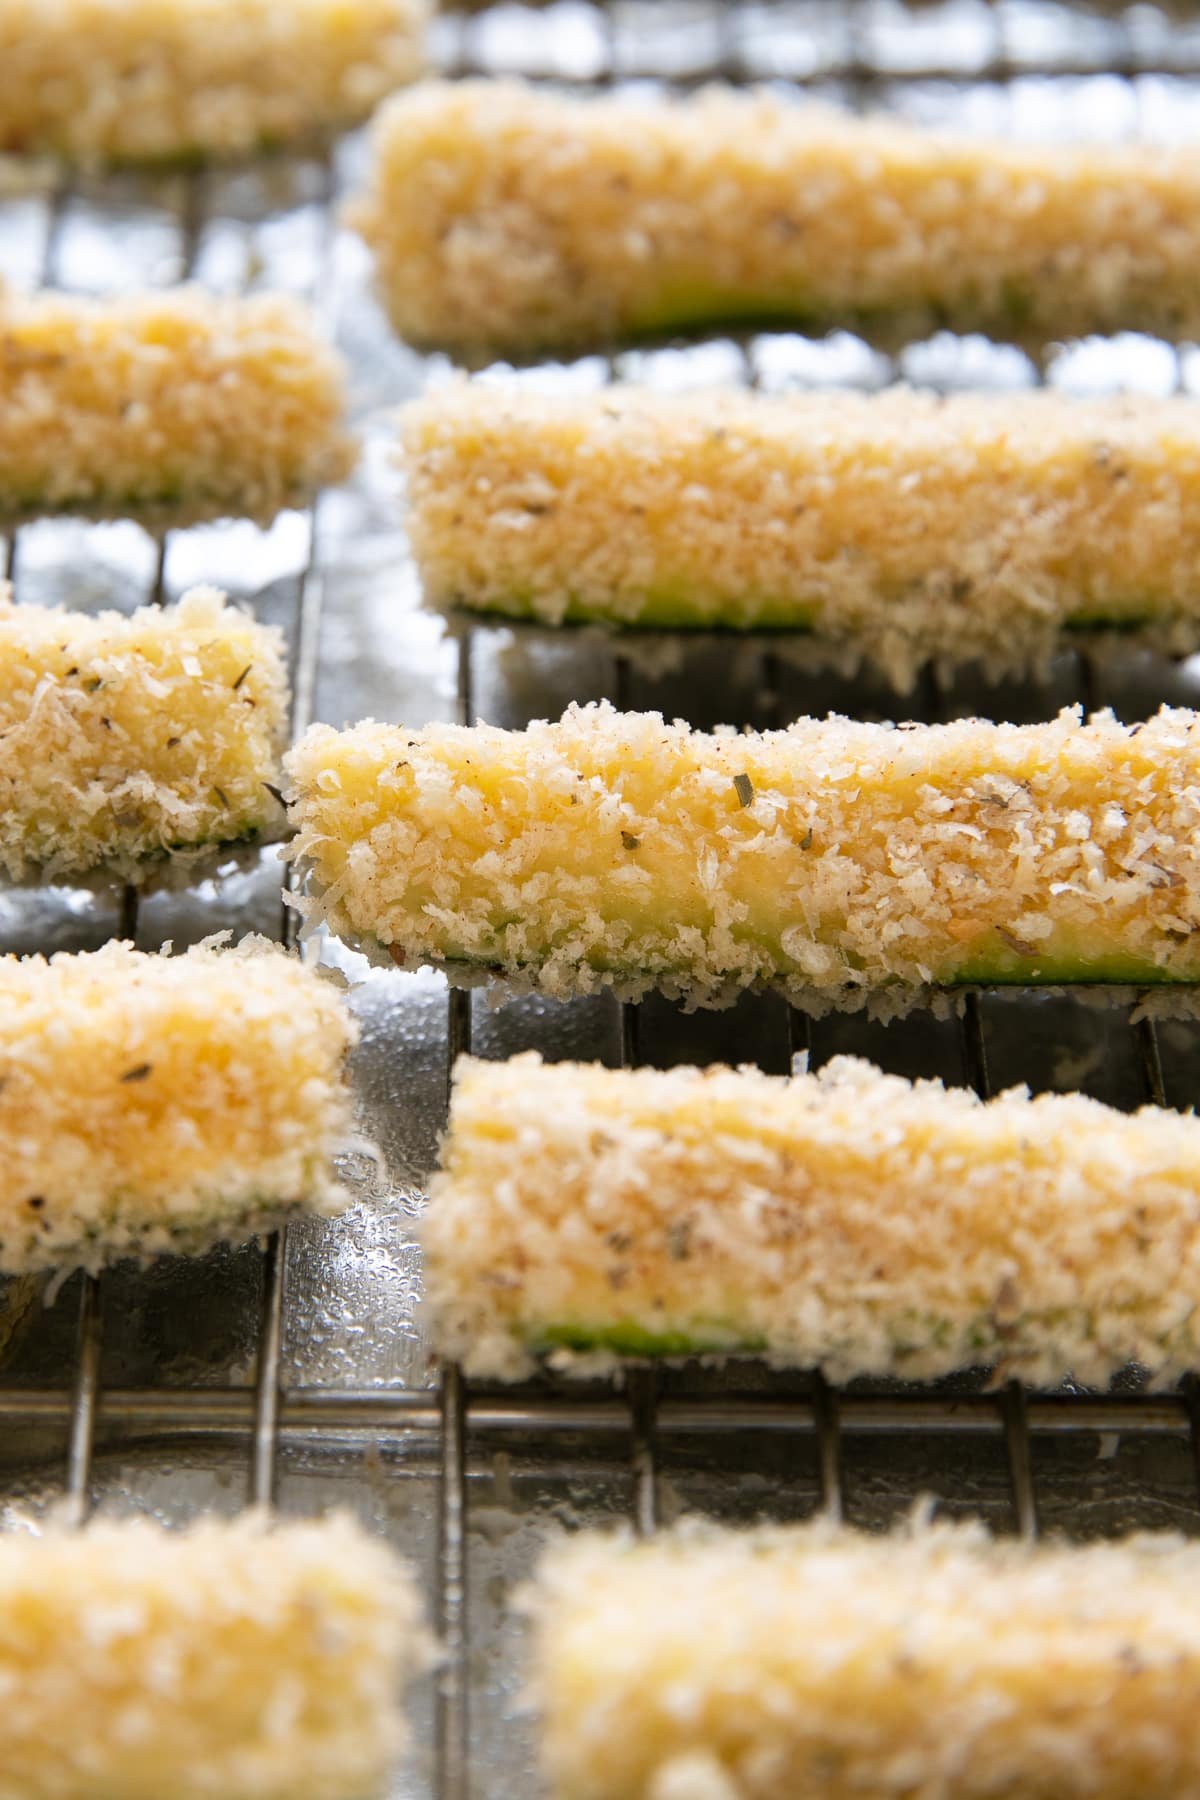 Sliced zucchini coated in panko and parmesan breadcrumbs on a wire rack before being baked.